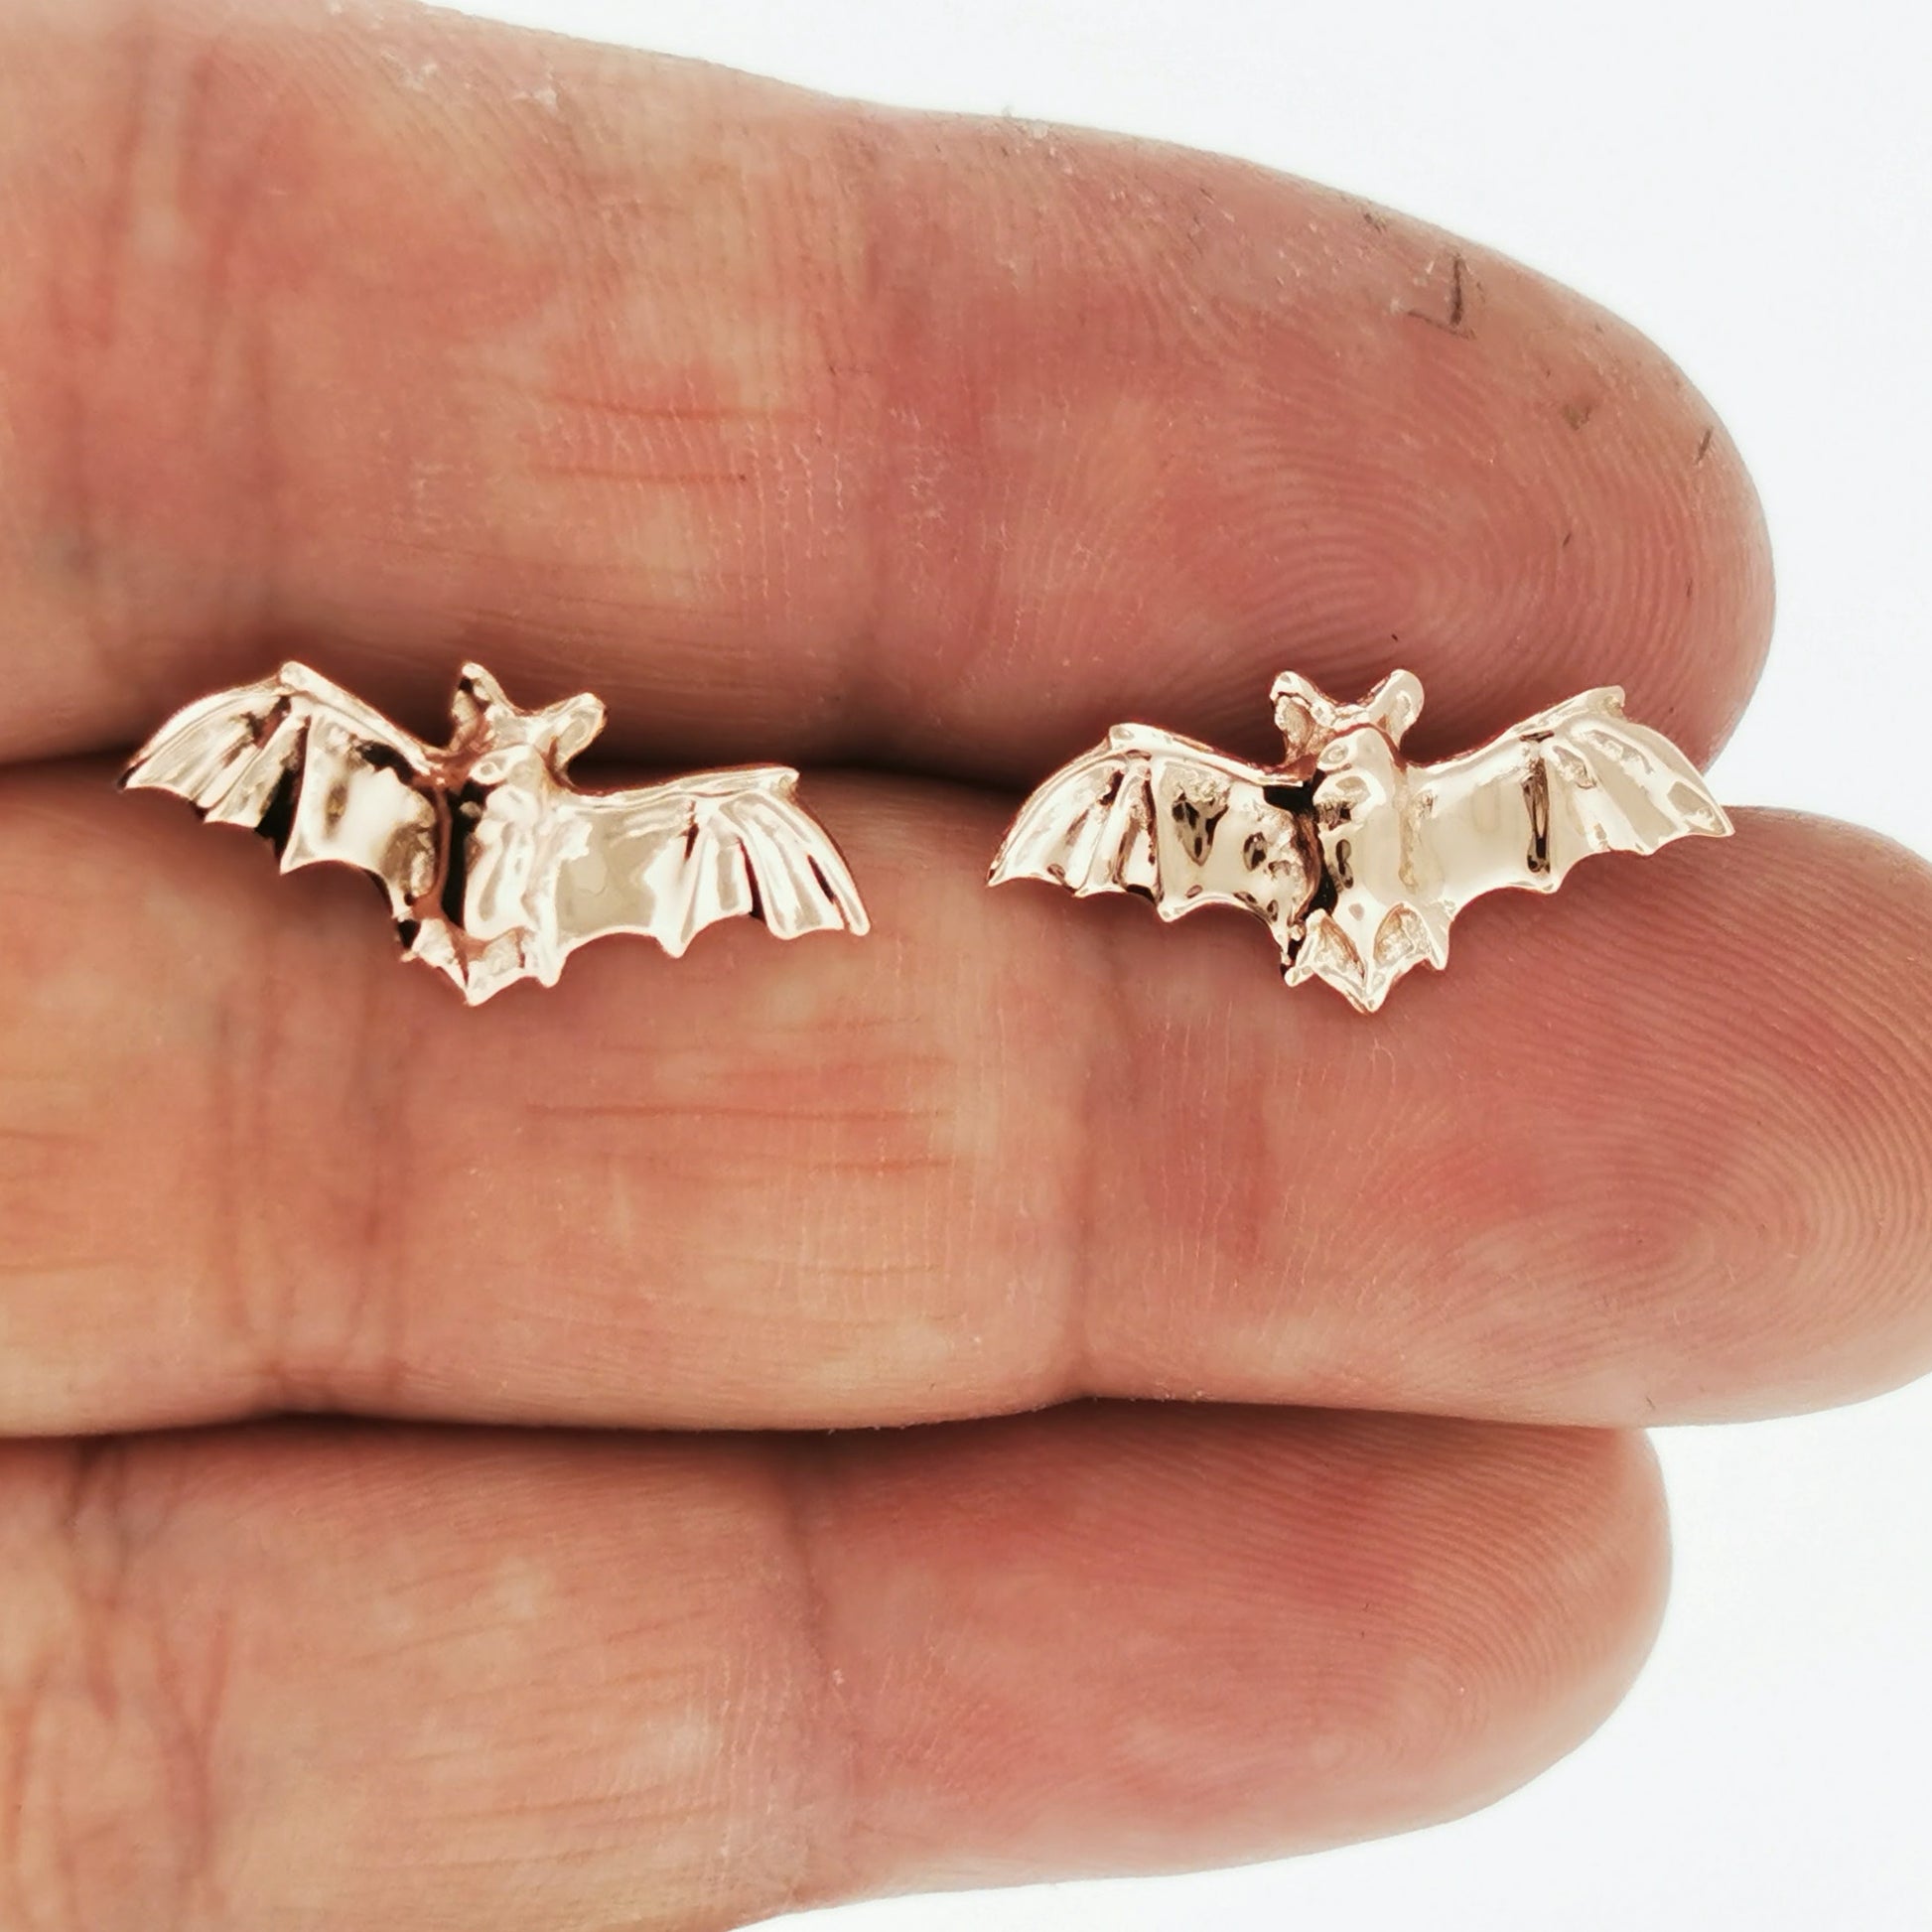 Bat Stud Earrings in Gold Made to Order, Gold Bat Earrings, Gold Bat Jewellery, Gothic Bat Earrings, Gold Animal Stud Earrings, Gold Bat Jewellery, Animal Stud Earrings, Gold Stud Earrings, Bat Lover Gift, Gold Witch Aesthetic, Spooky Gold Earrings